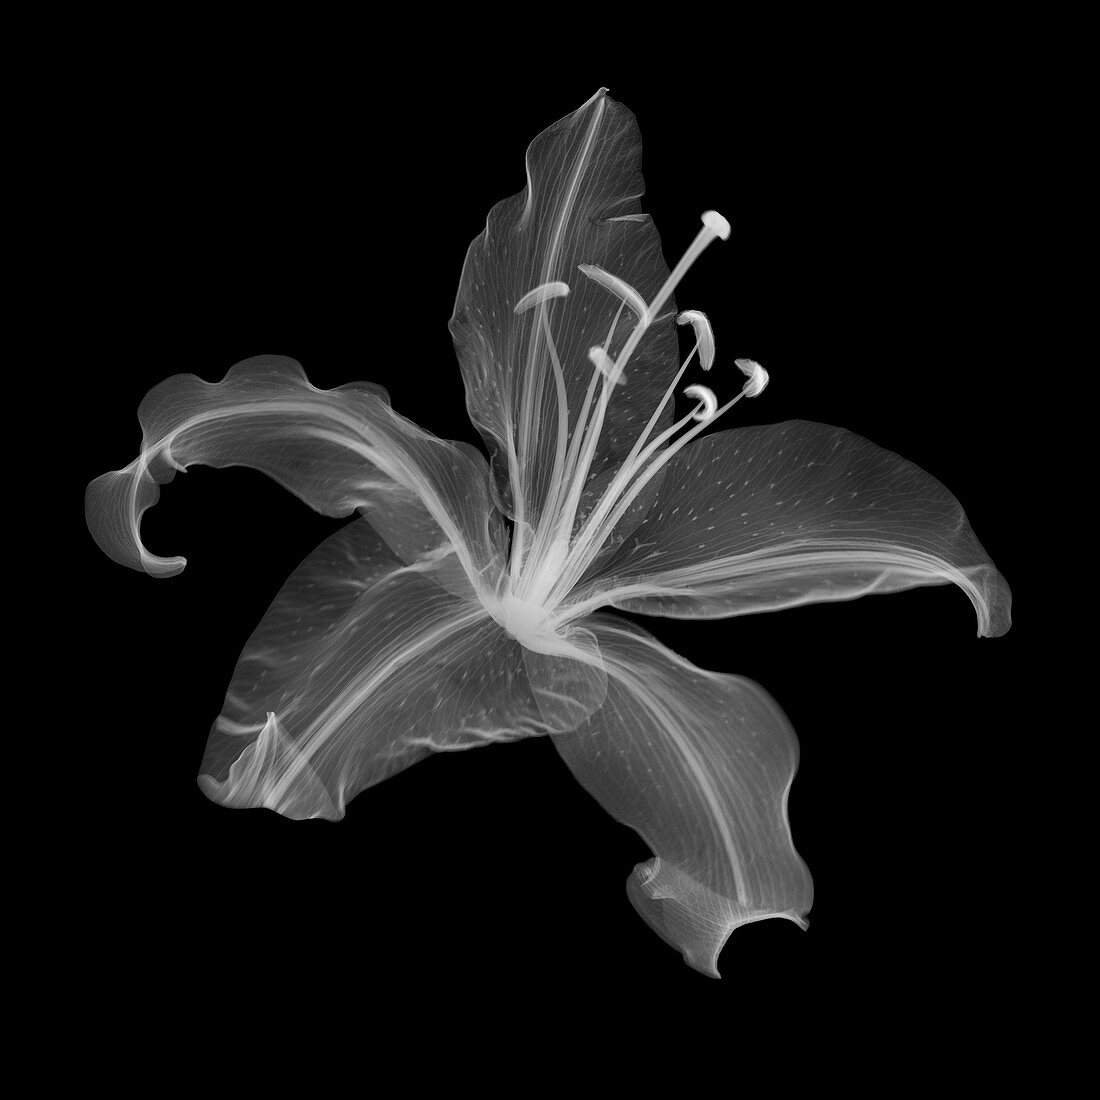 Lily flower (Lilium sp.), X-ray